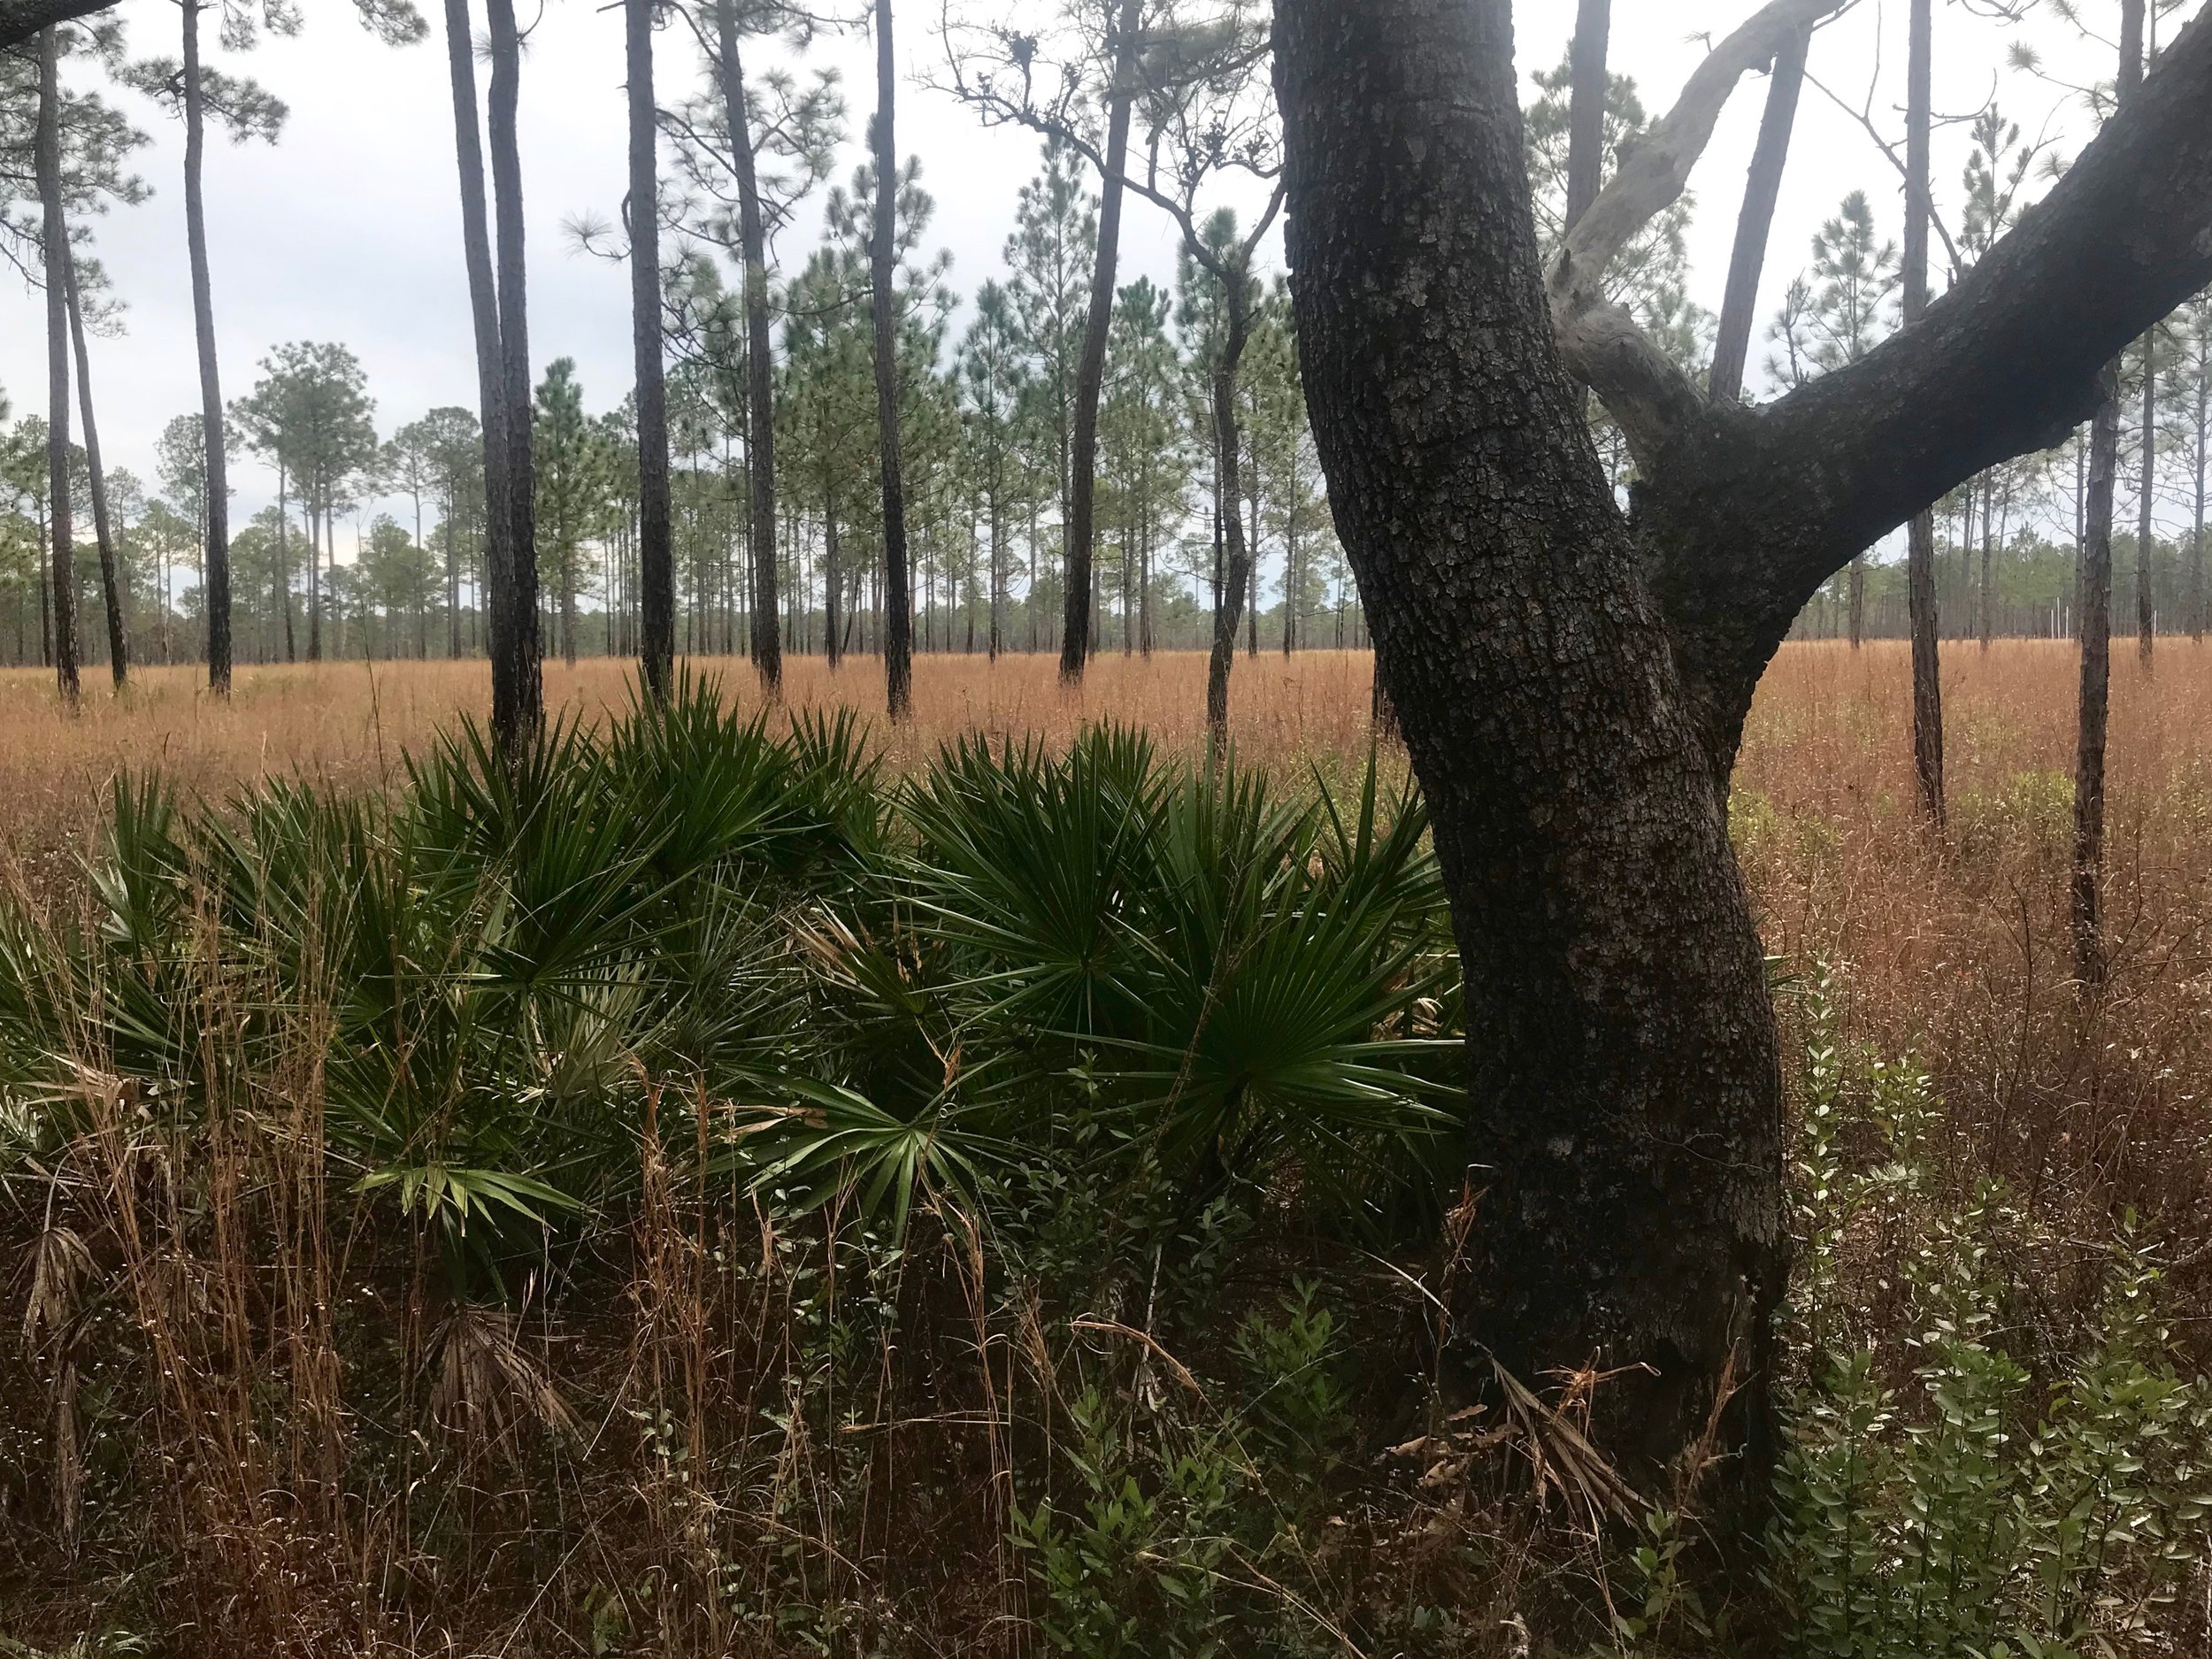  The wet pine savanna habitat in the Southeastern U.S. has shrunk to less than 5 percent of its former size. Rick Holmes photo 